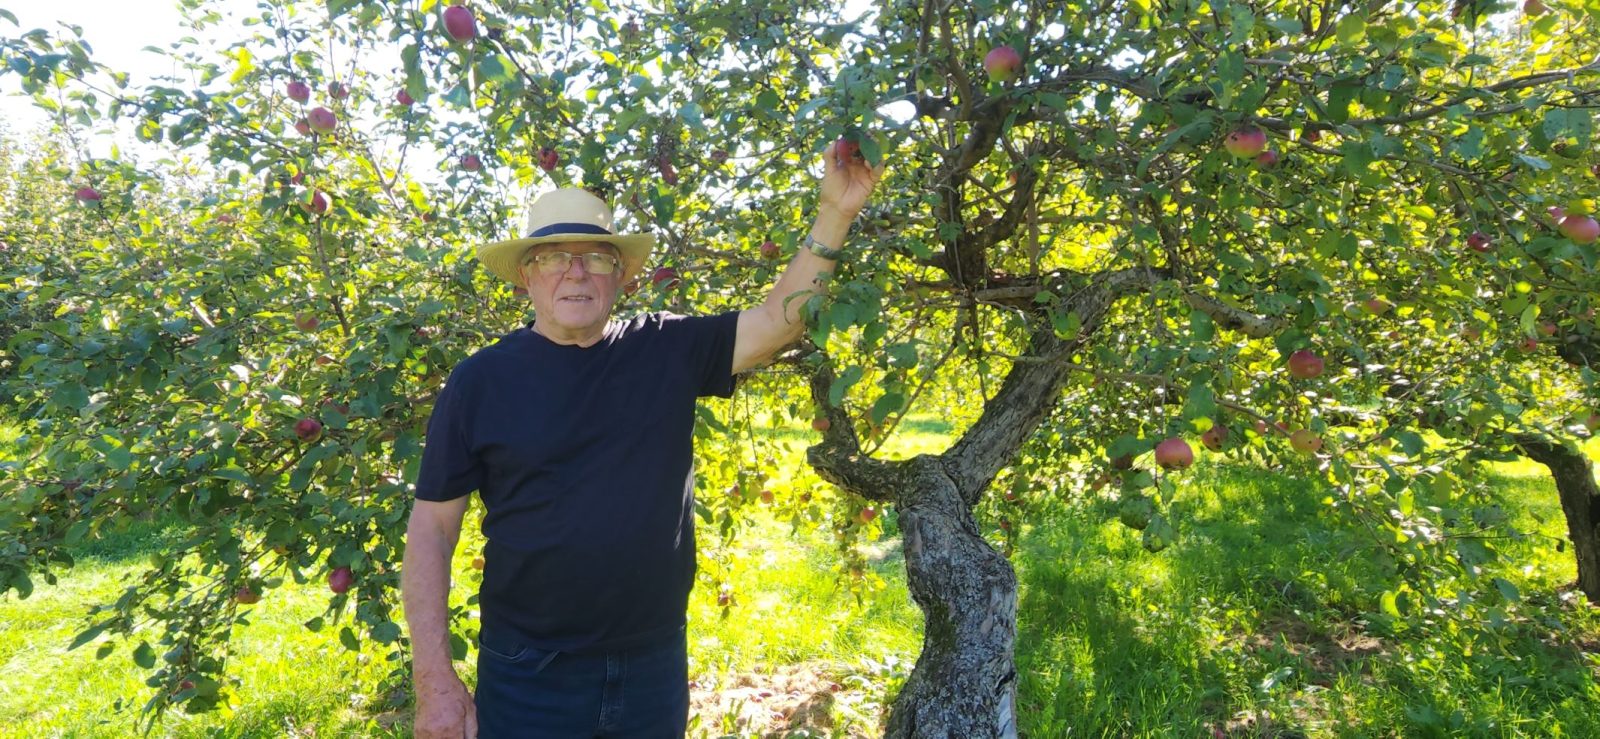 Bourget apple orchard ripe for the picking